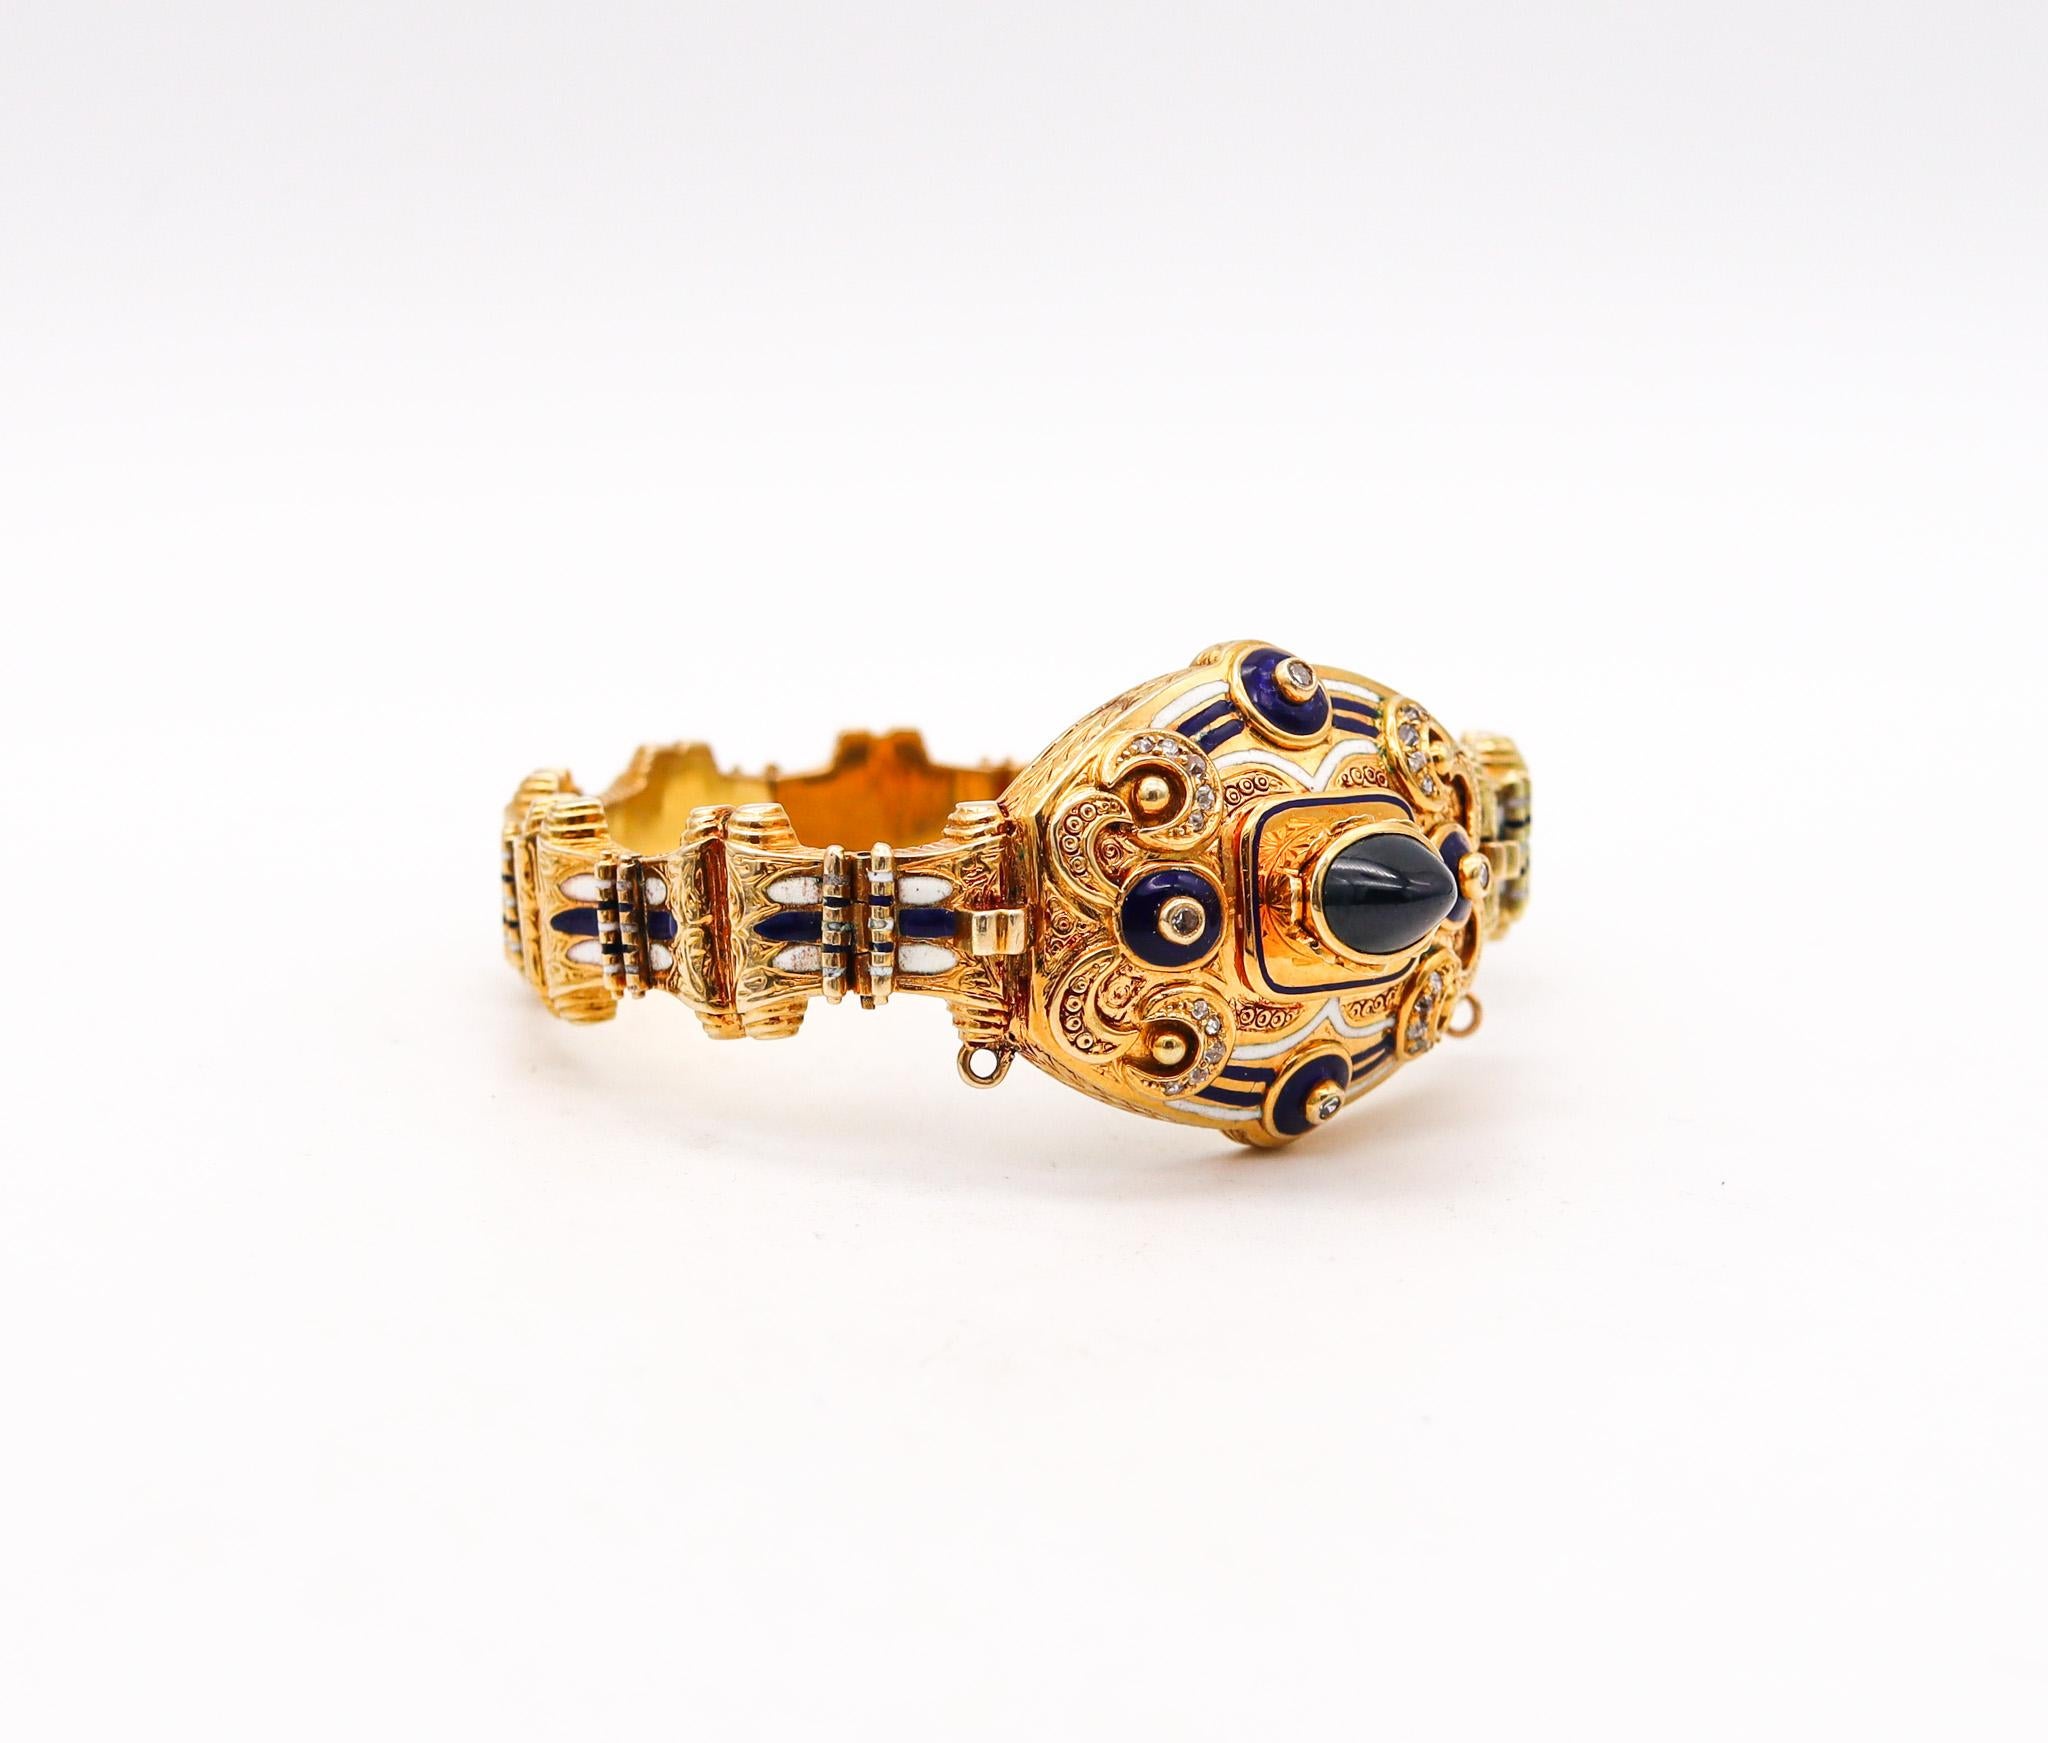 Sugarloaf Cabochon Edwardian 1900 Enameled Bracelet In 18Kt Yellow Gold With Sapphires And Diamonds For Sale